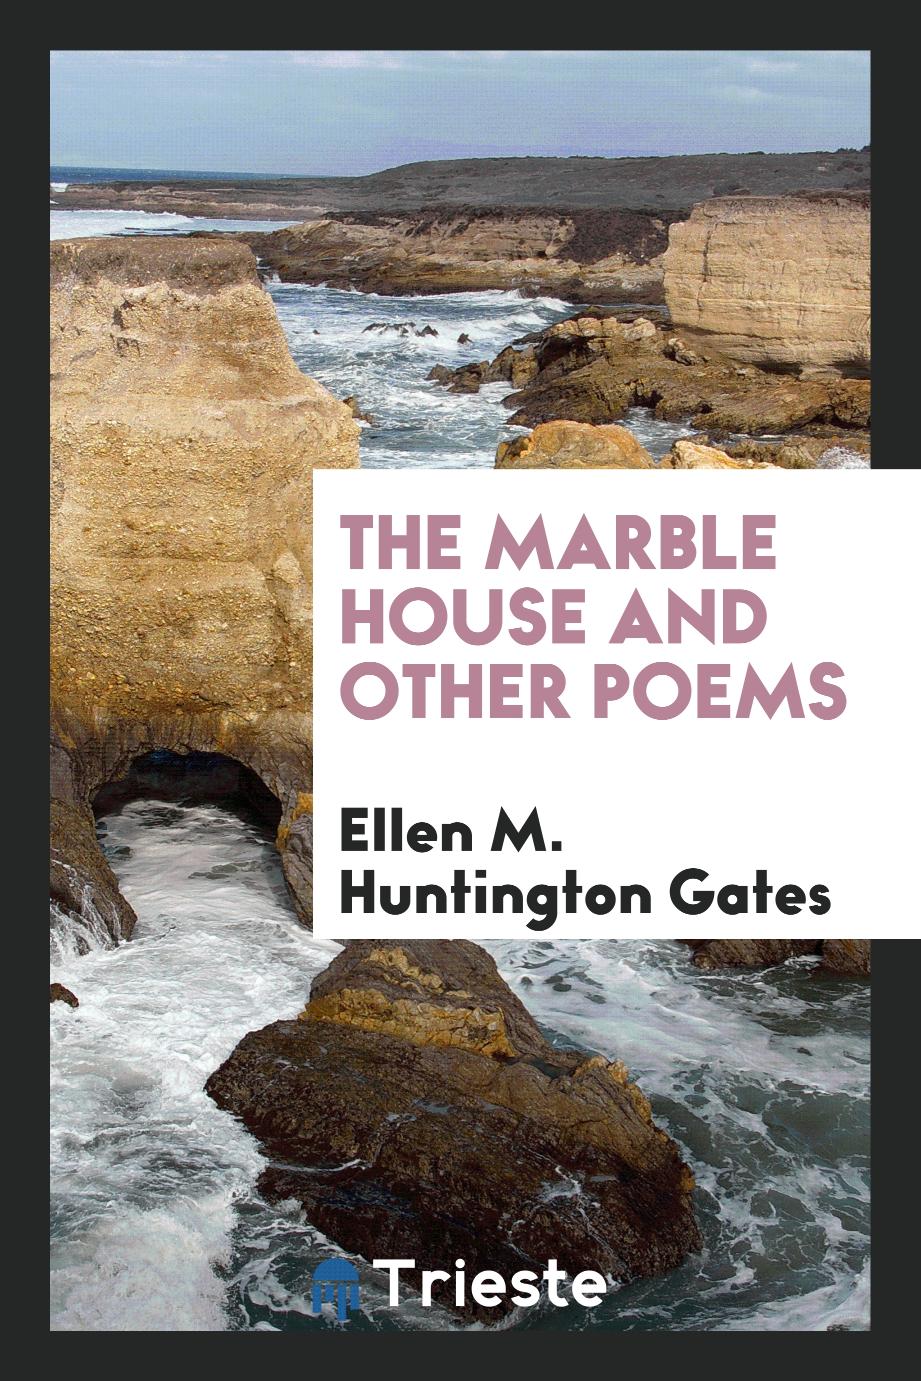 The marble house and other poems